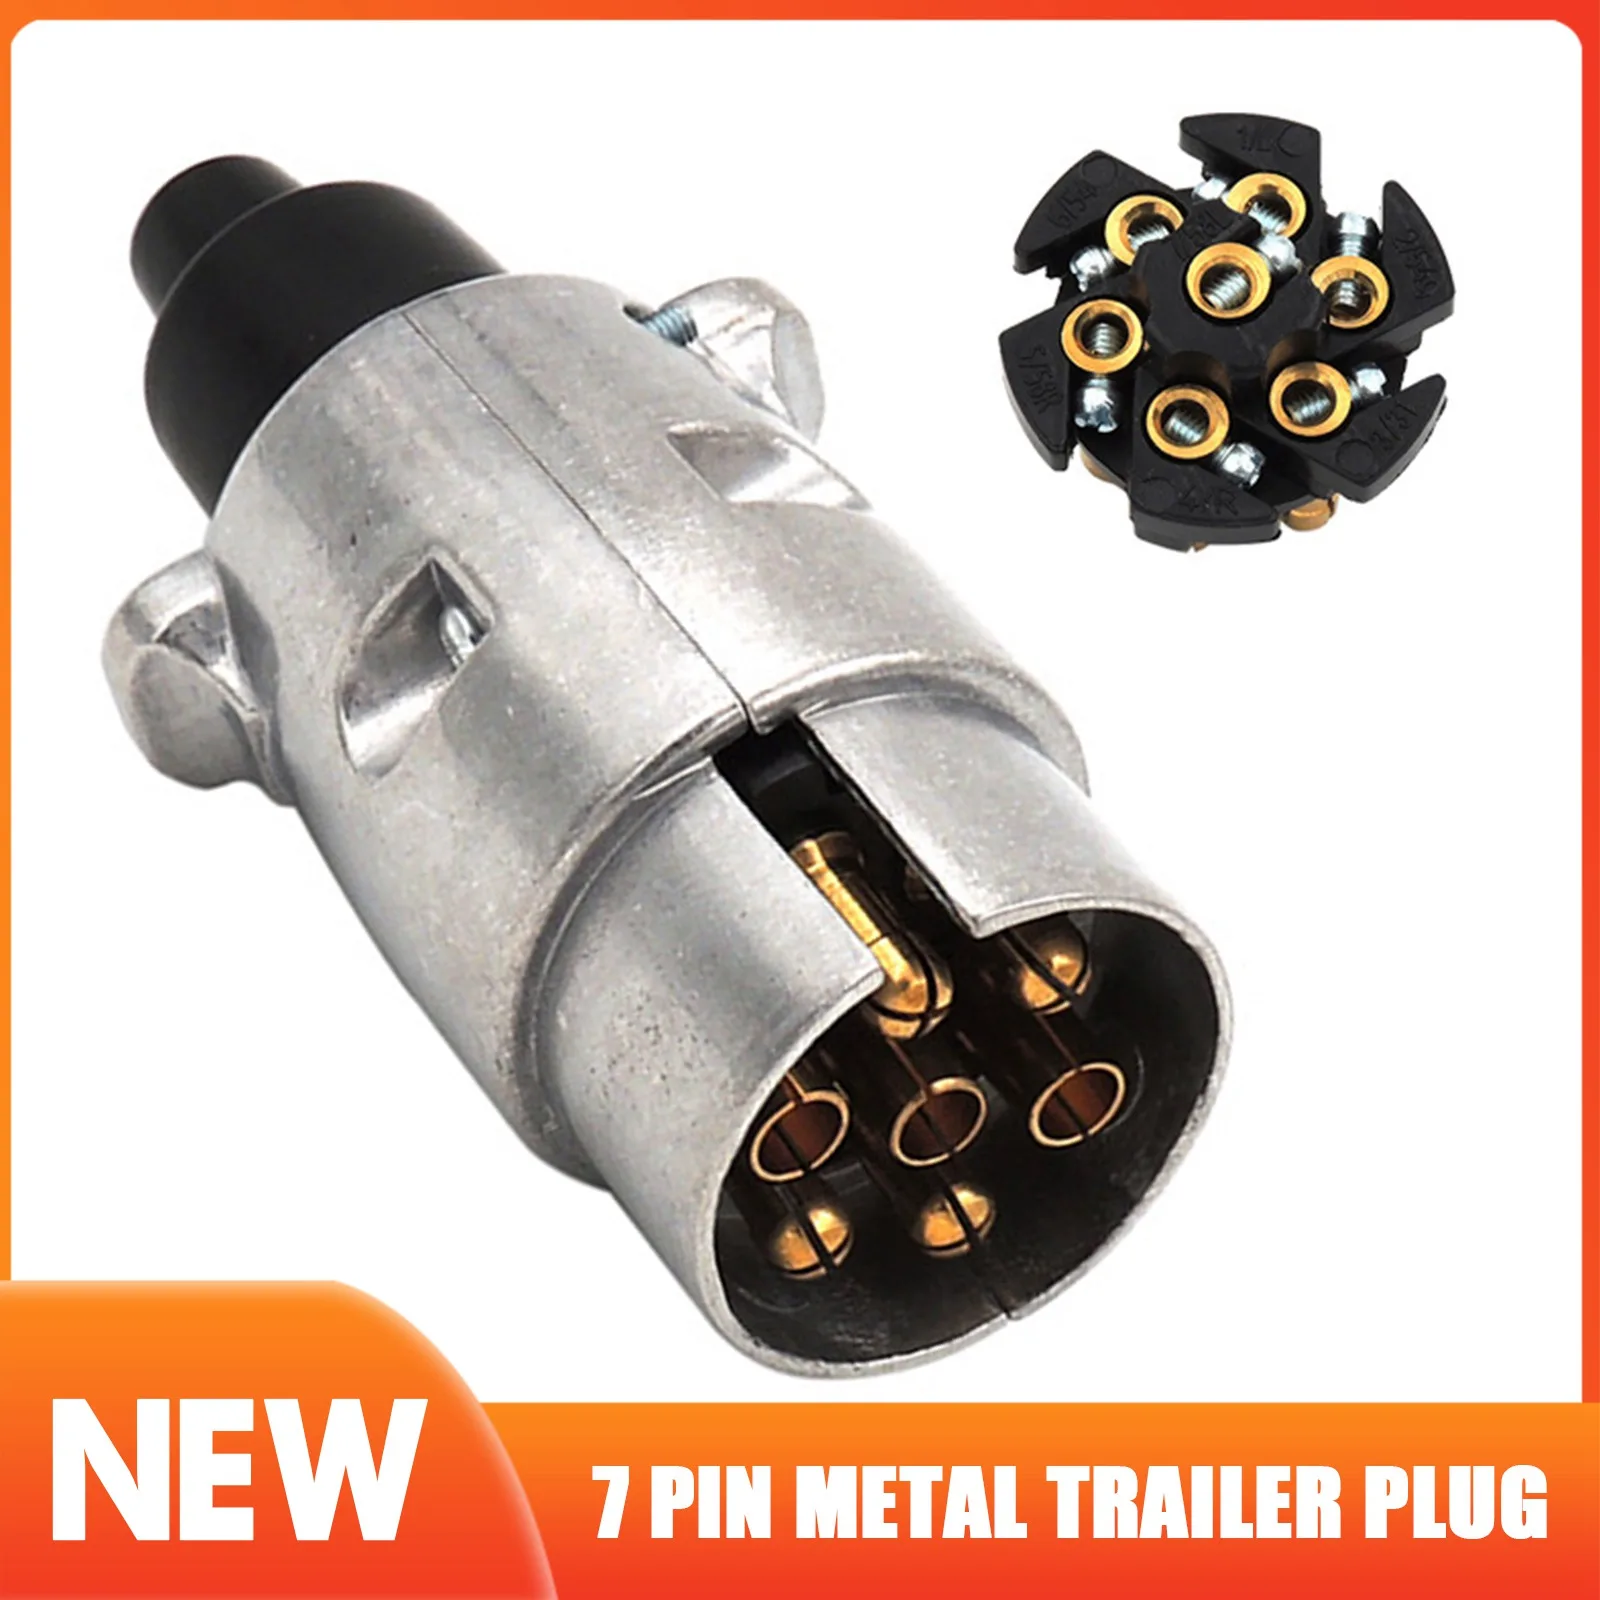 

New 12V 7 Way Round Standard European Car Plug Connector Plastic Car Trailer 7 Pin Socket Plugs For Trailers Car Accessories